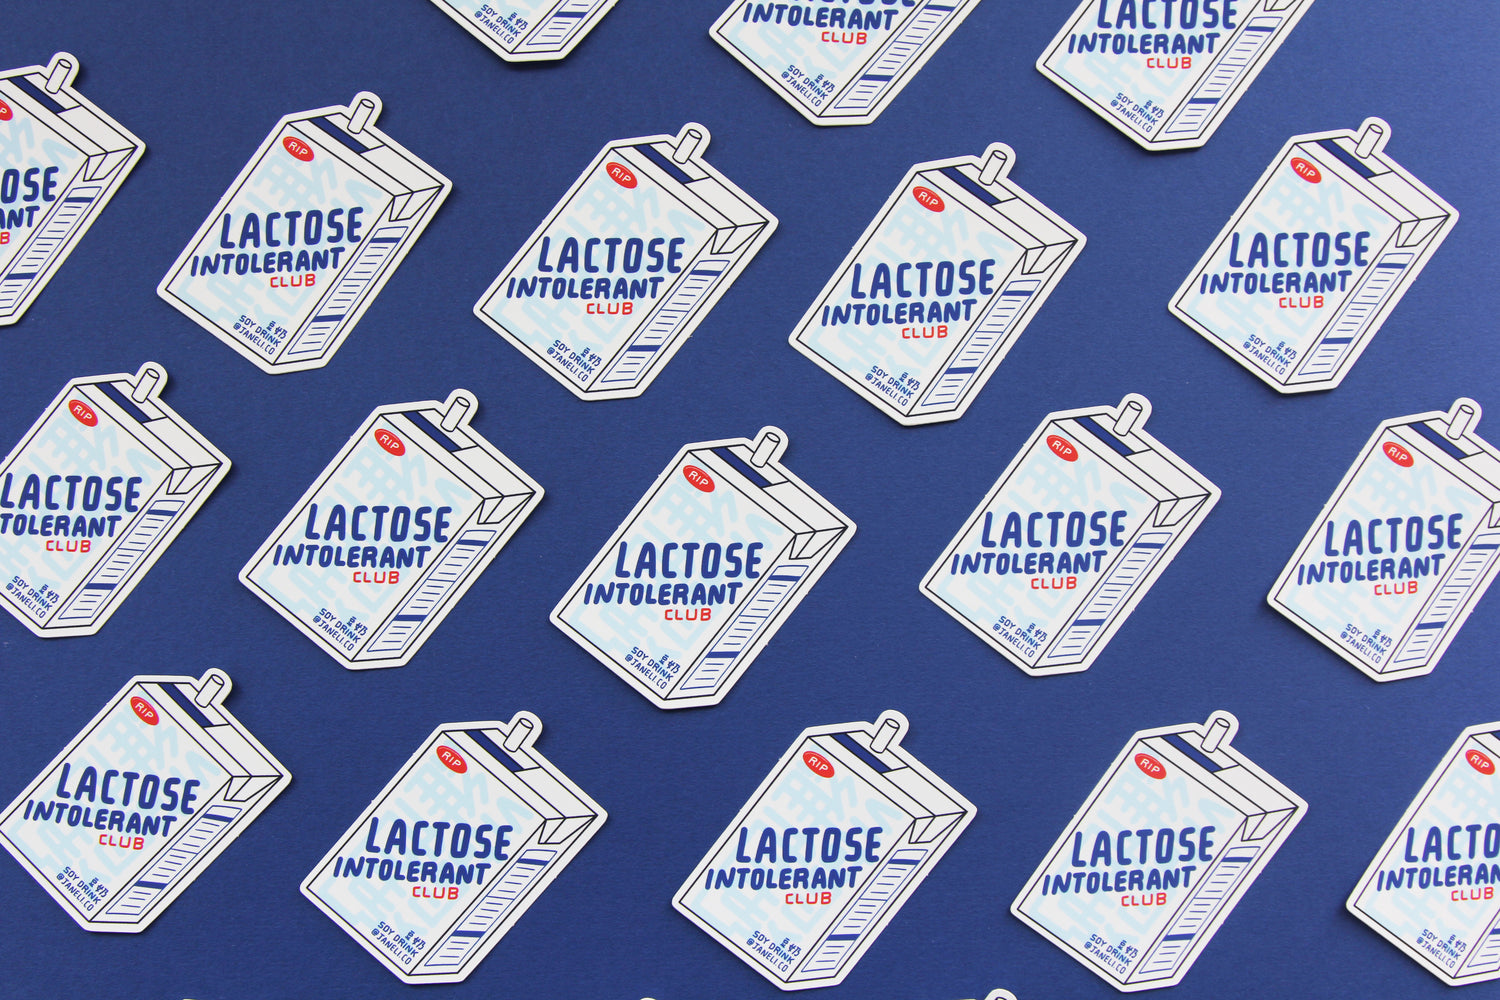 A grid of JaneLi.Co stickers that say "Lactose Intolerant Club" in the shape of soymilk cartons with straws over a navy blue background. 